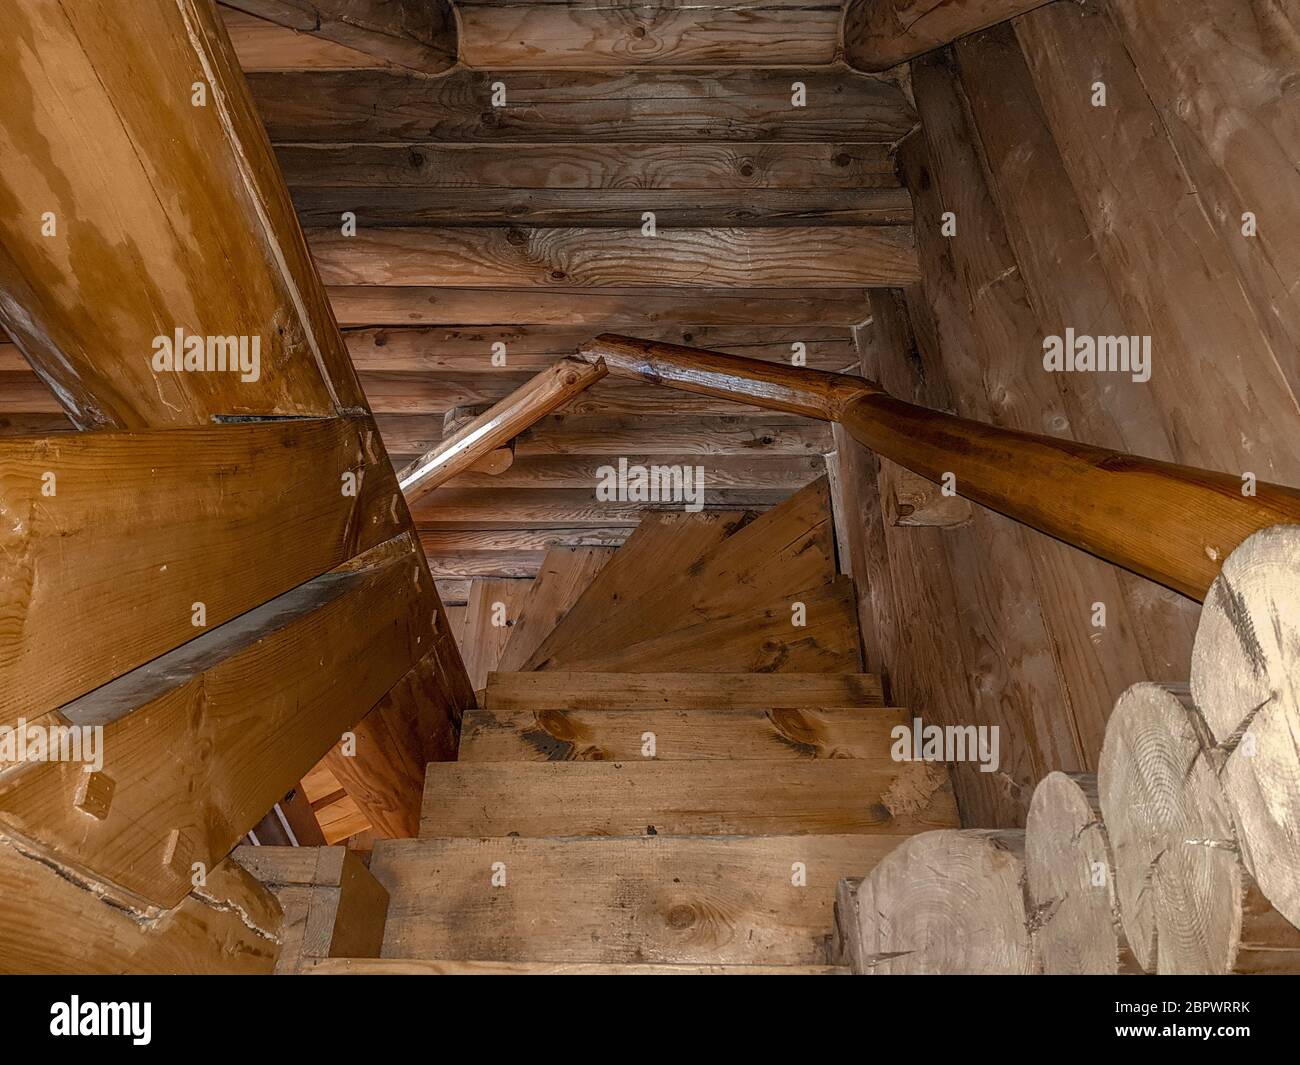 A staircase with a spiral descent, folded wooden steps, covered with a dark brown varnish of a traditional design in a house with a log house. Stock Photo